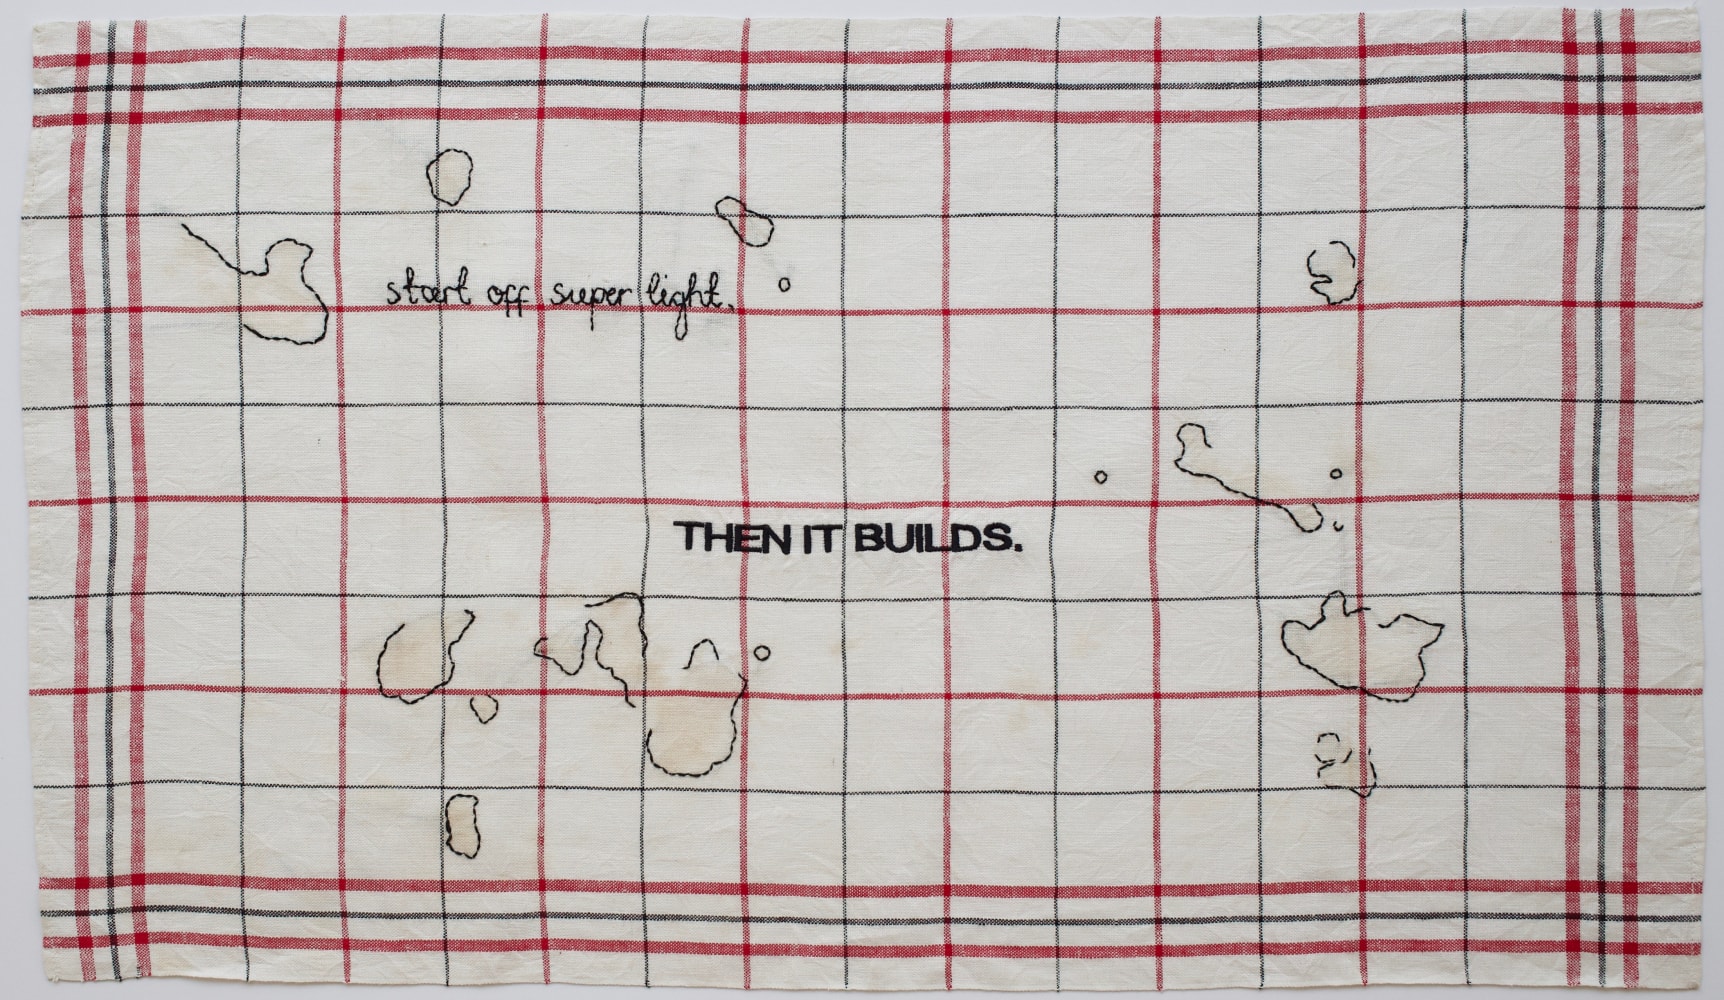 Then It Builds, 2018
Embroidery on vintage linen tea towel
17 x 29 inches
&amp;nbsp;